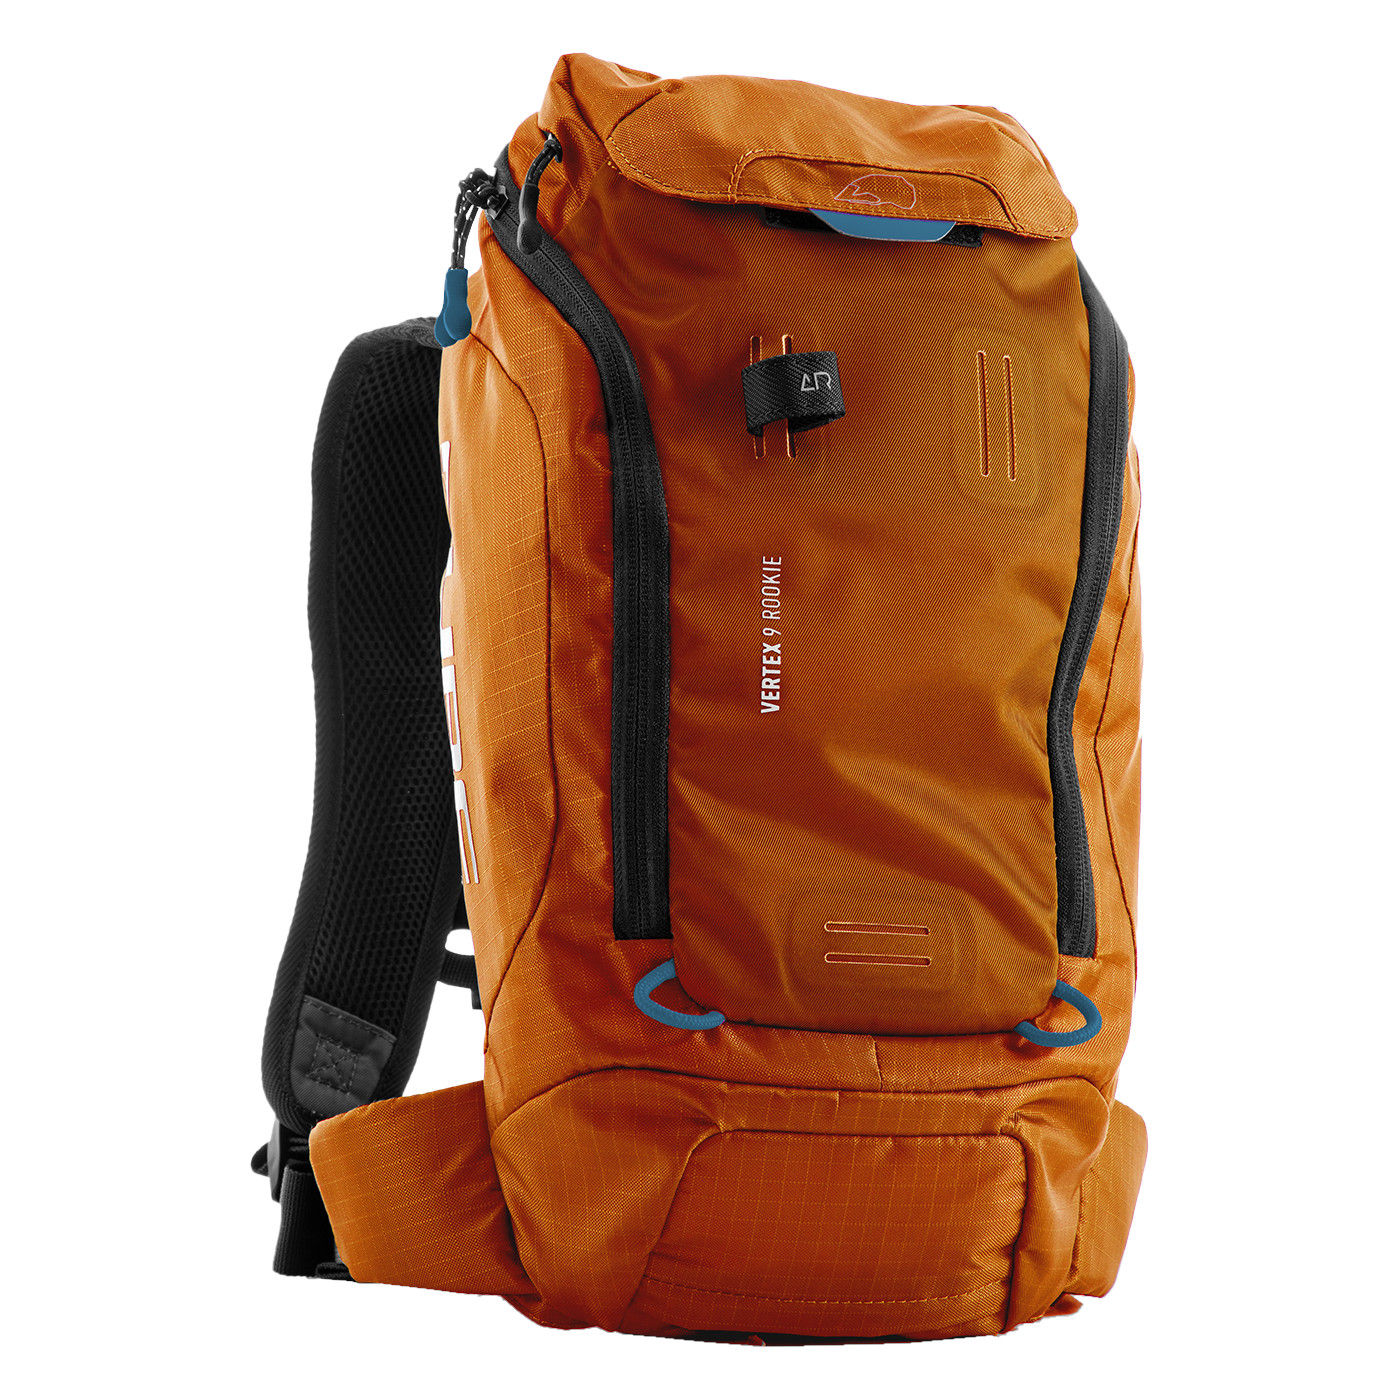 Picture of CUBE VERTEX 9 ROOKIE Backpack - X Actionteam - orange